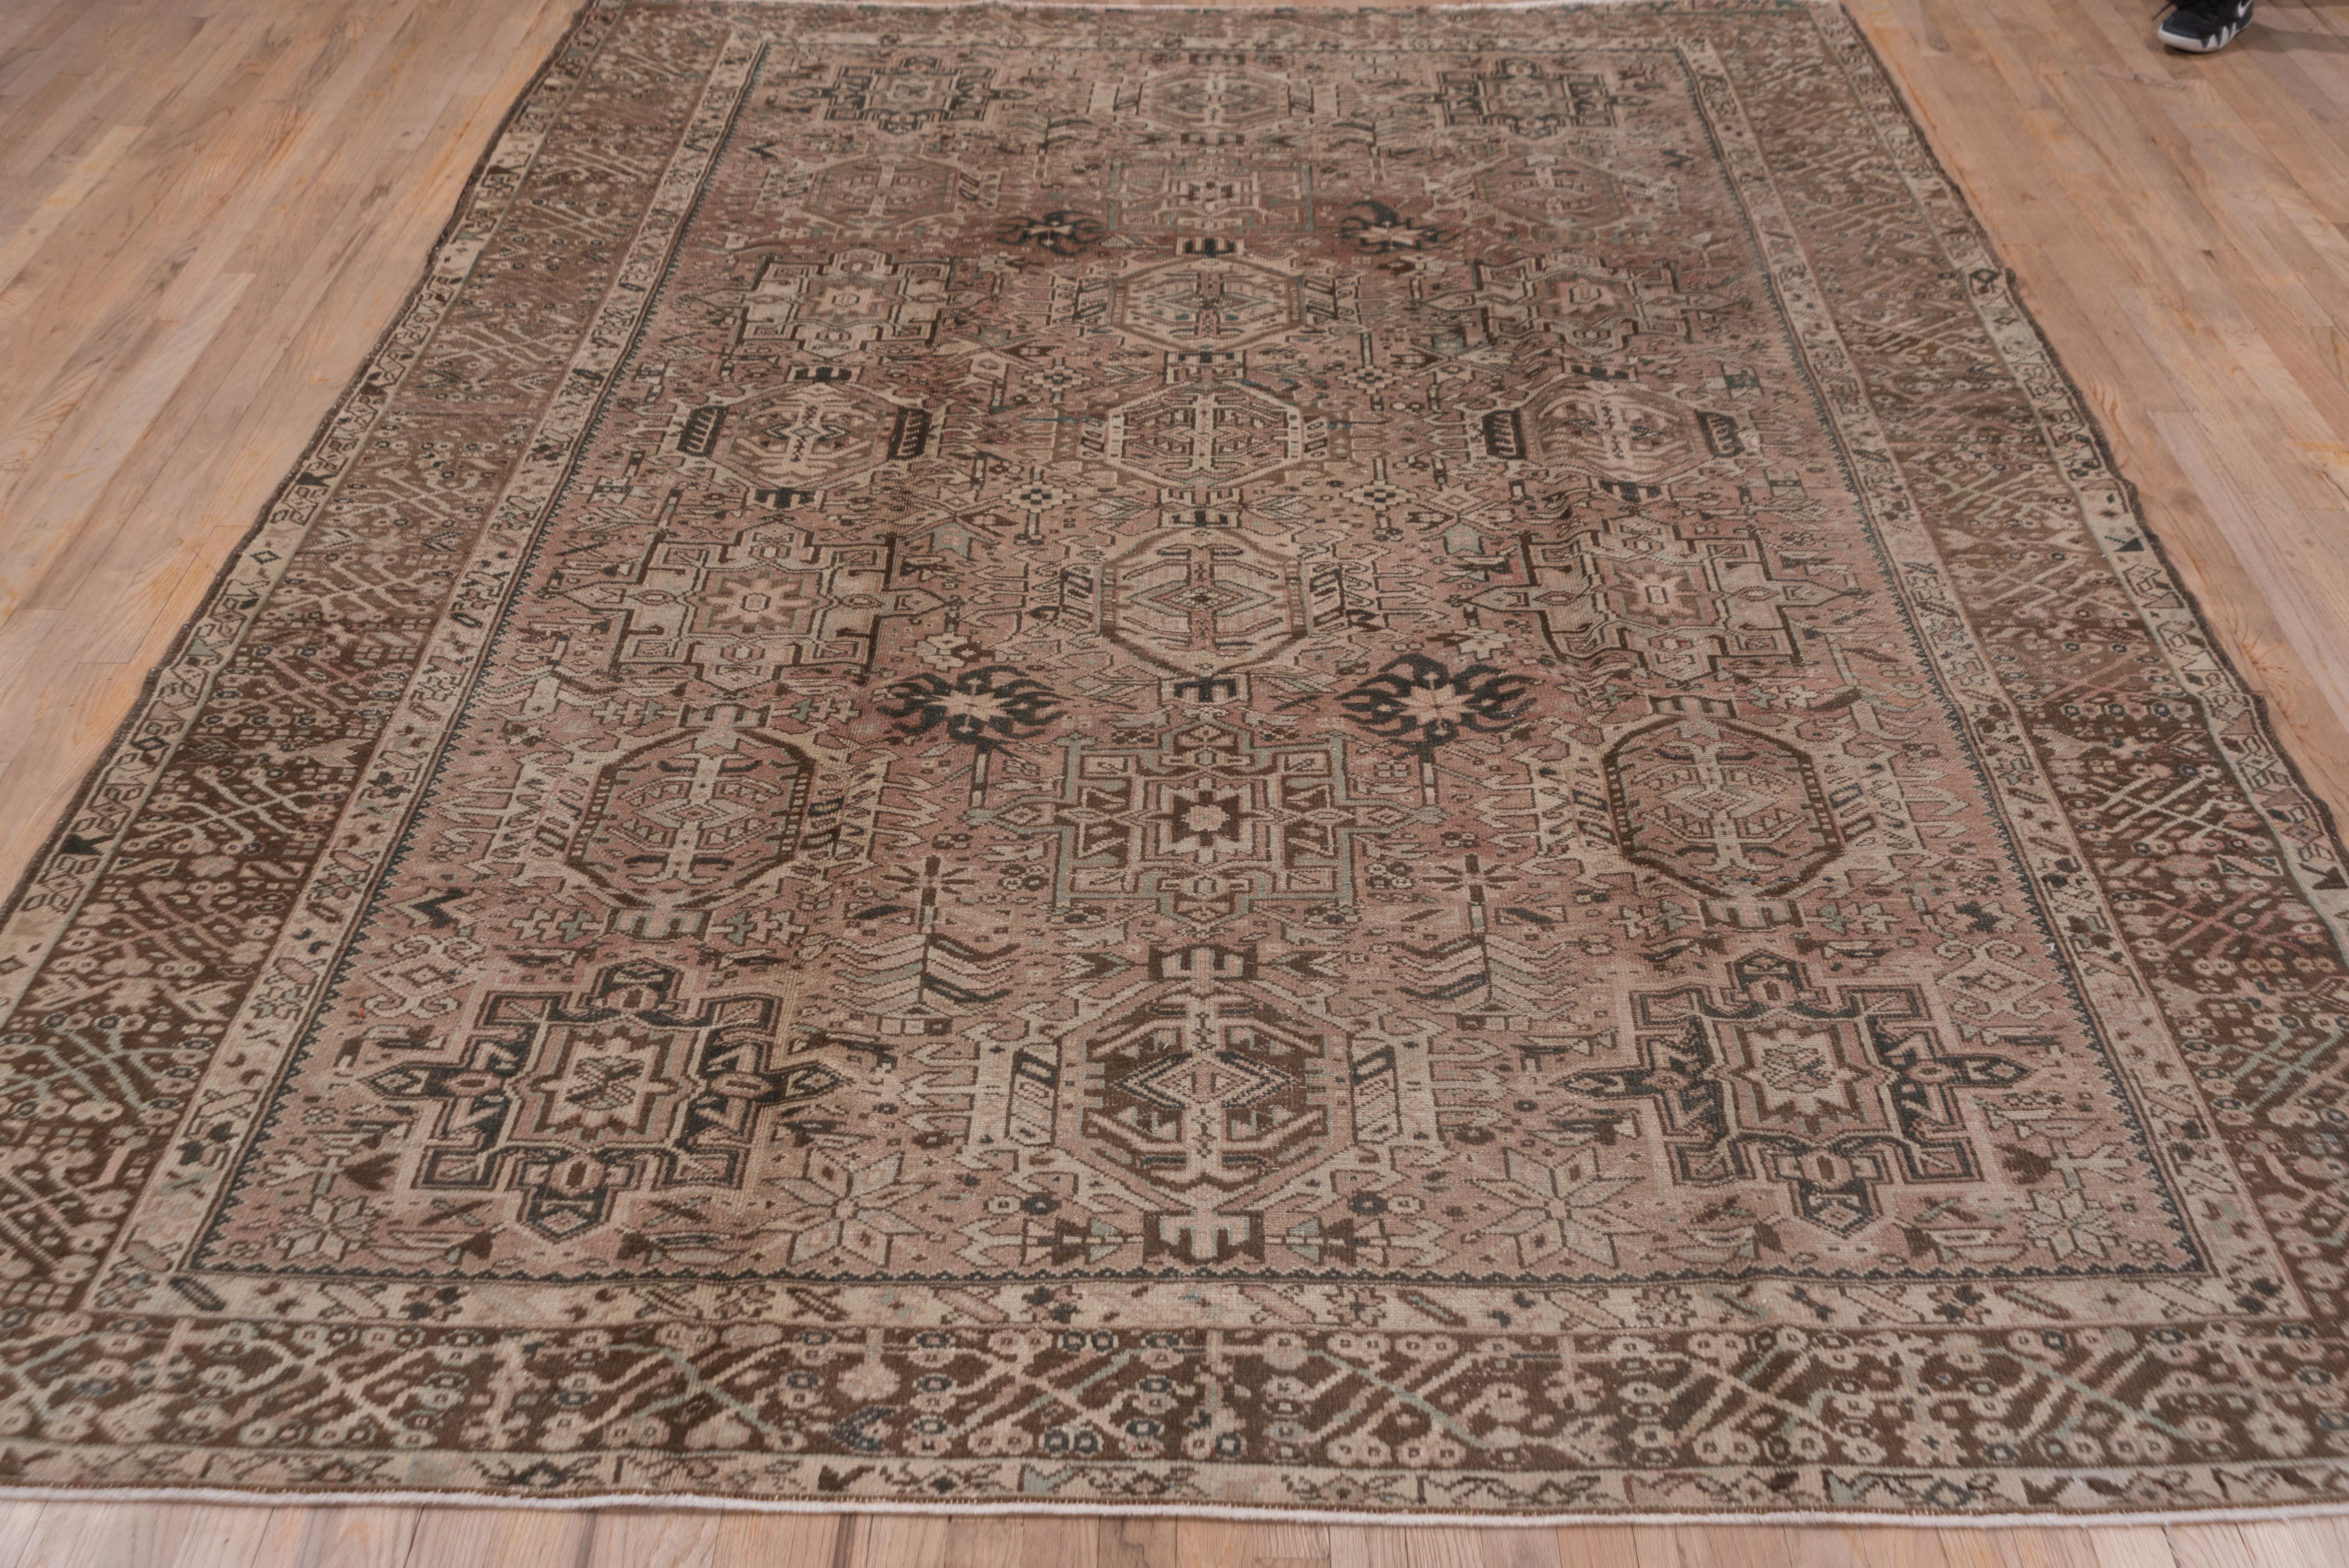 The buff field of this NW Persian village carpet displays three columns of characteristic Karaja octogramme and hooked hexagon medallions, all within a square bud-spray module repeat on the sienna brown border.